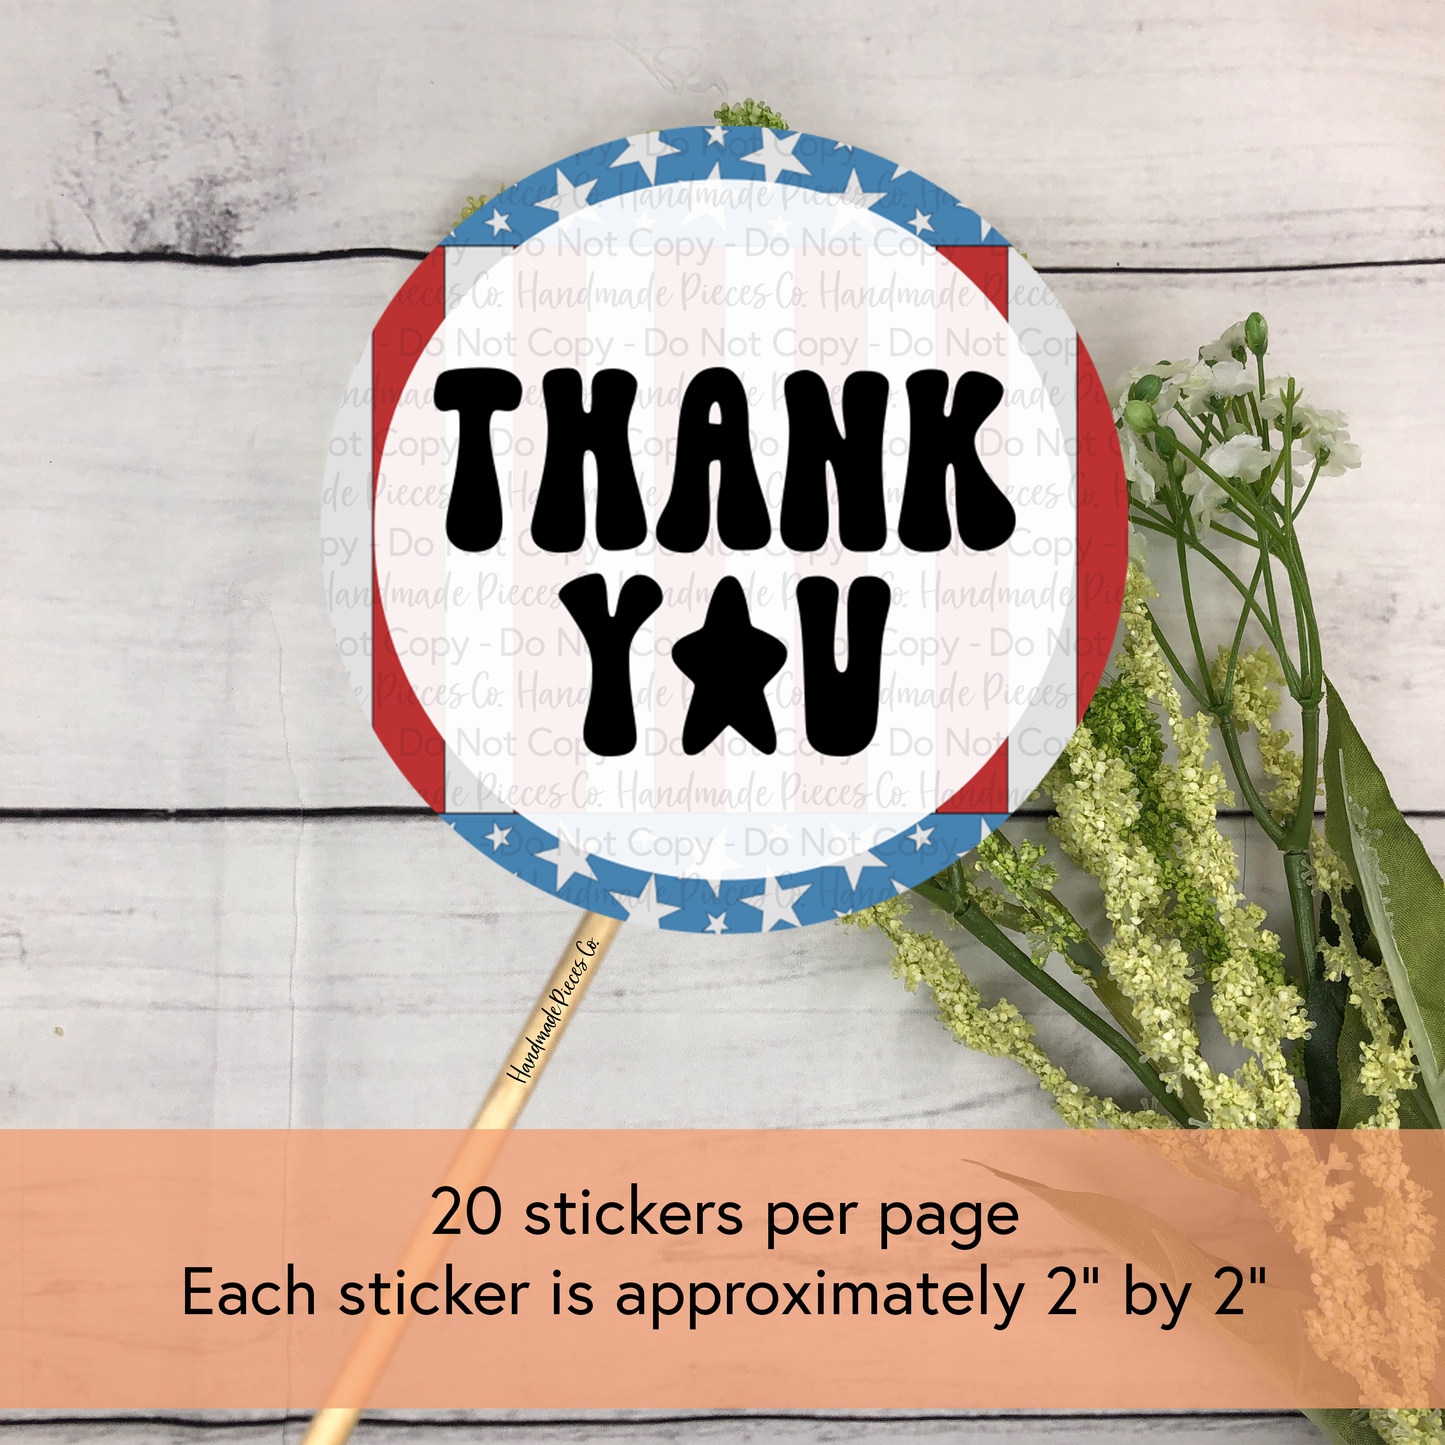 Thank You - Packaging Sticker, Red, White & Blue Theme